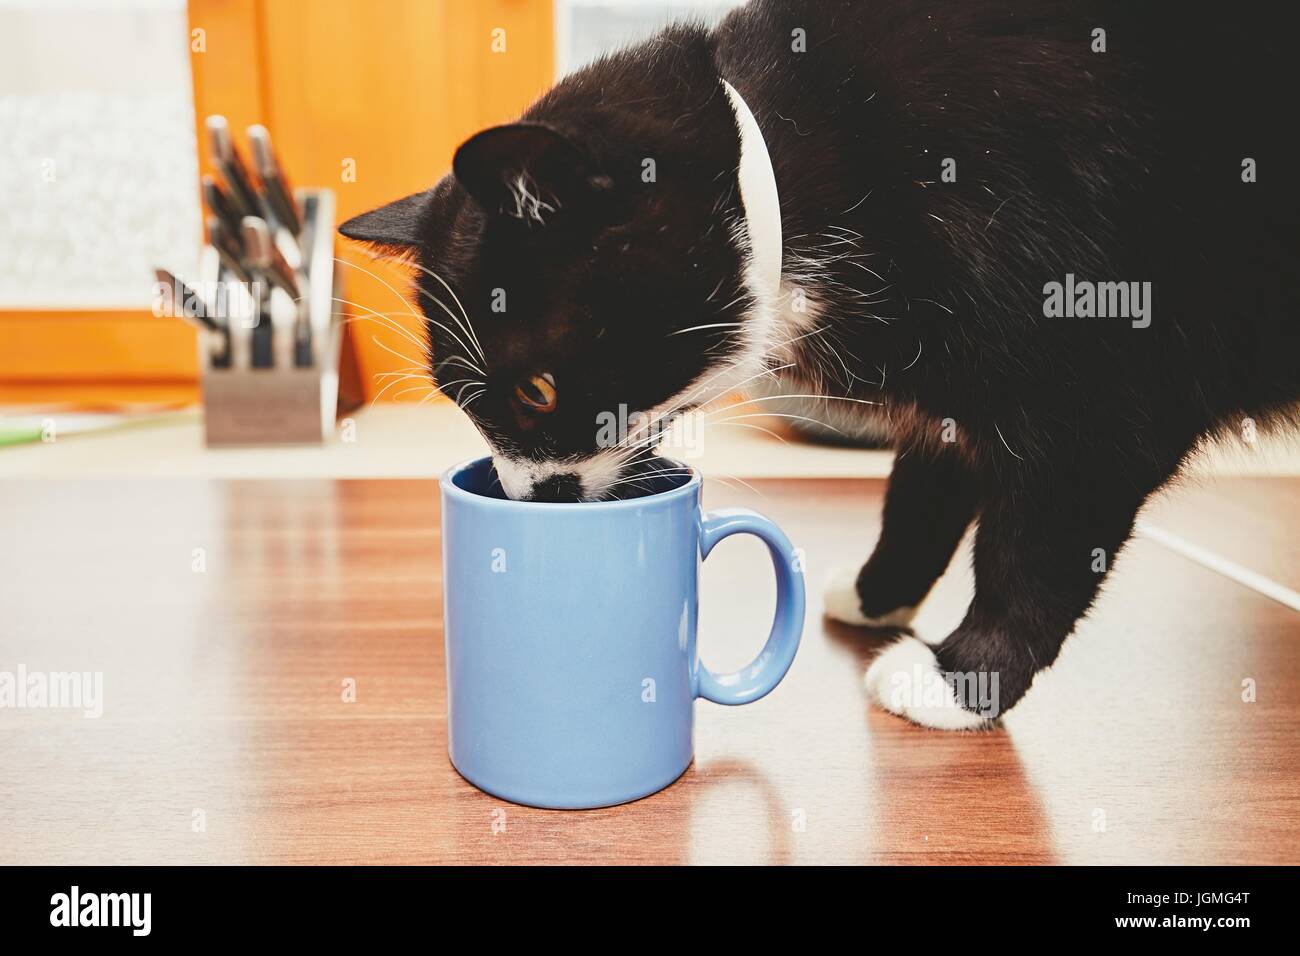 Domestic life with pets. Curious cat on the table drinking from mug. Stock Photo